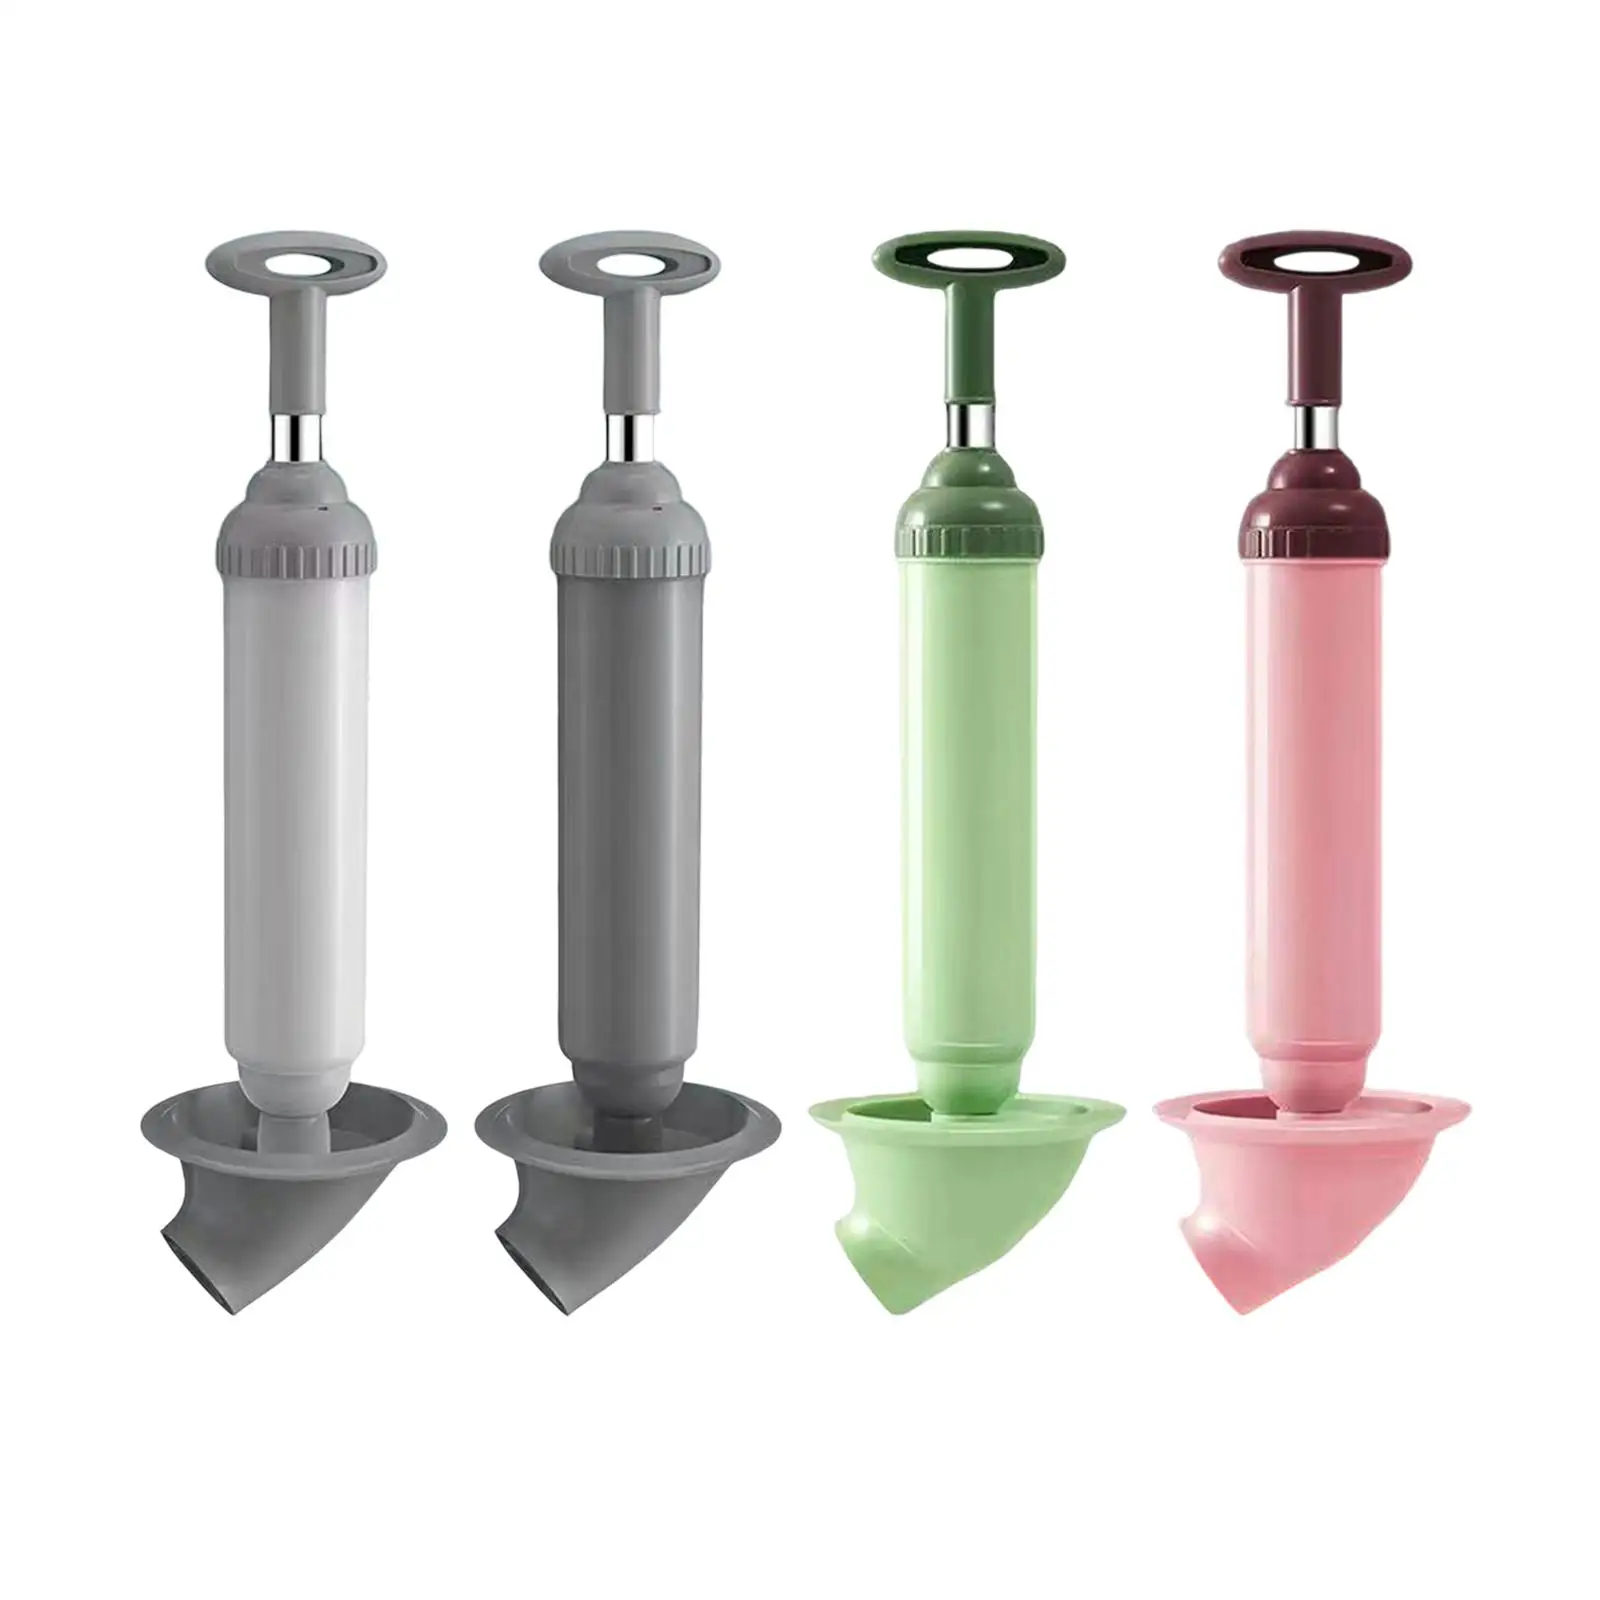 Toilet Plunger Accessories Strong Suction Pump High Pressure Drain Plunger for Sewer Dredging Plunger Bath Household Toilet Sink